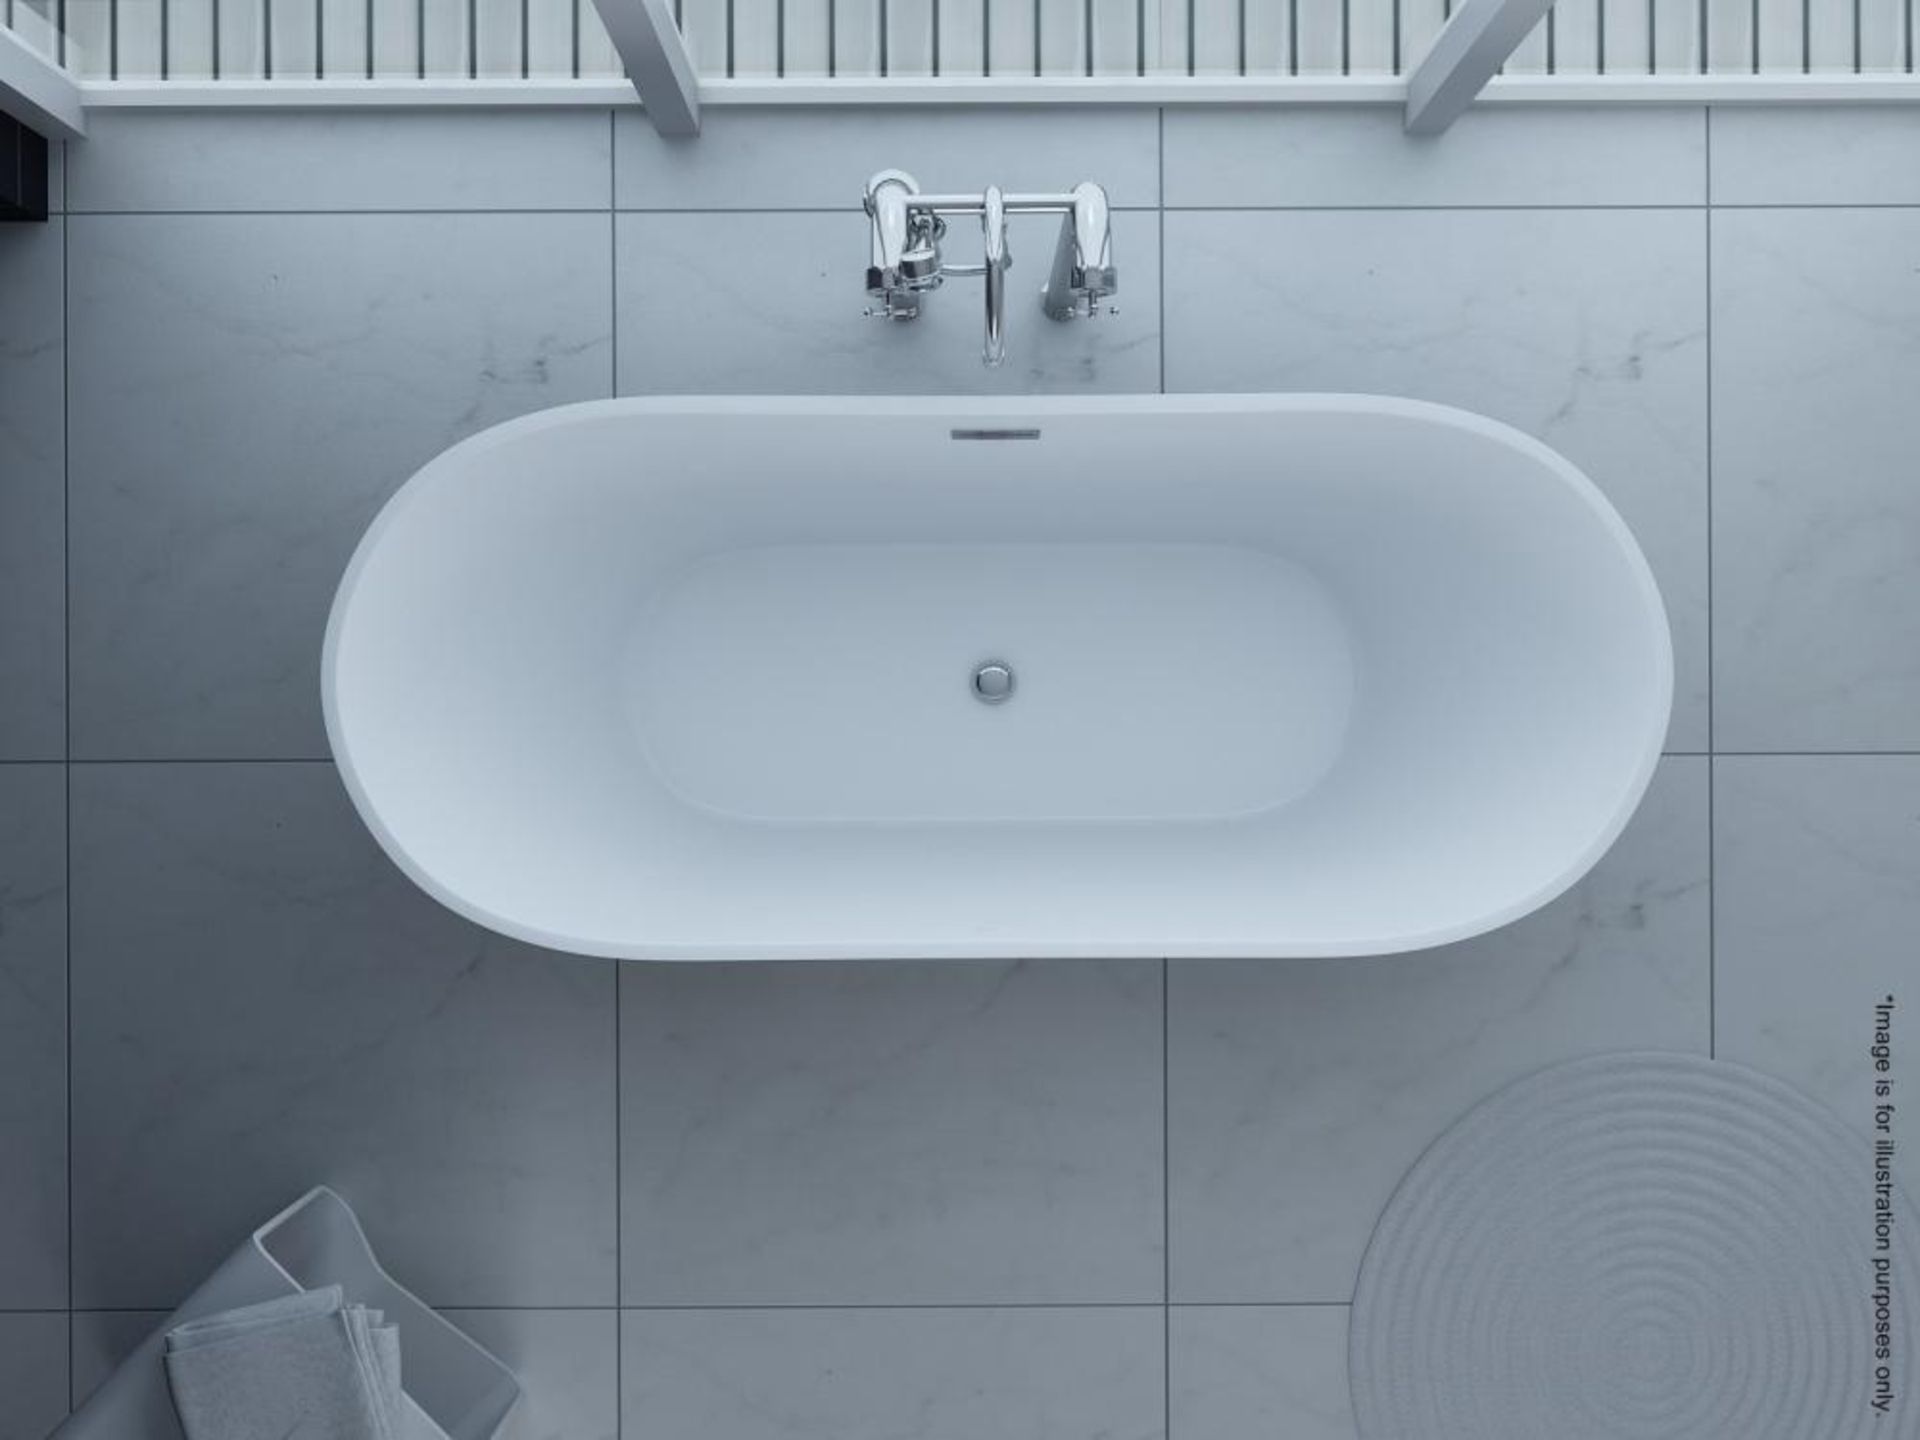 1 x Synergy 'Lugano' Freestanding Modern Double Ended Thin Edge Bath - 1600 x 800mm - Unused Boxed S